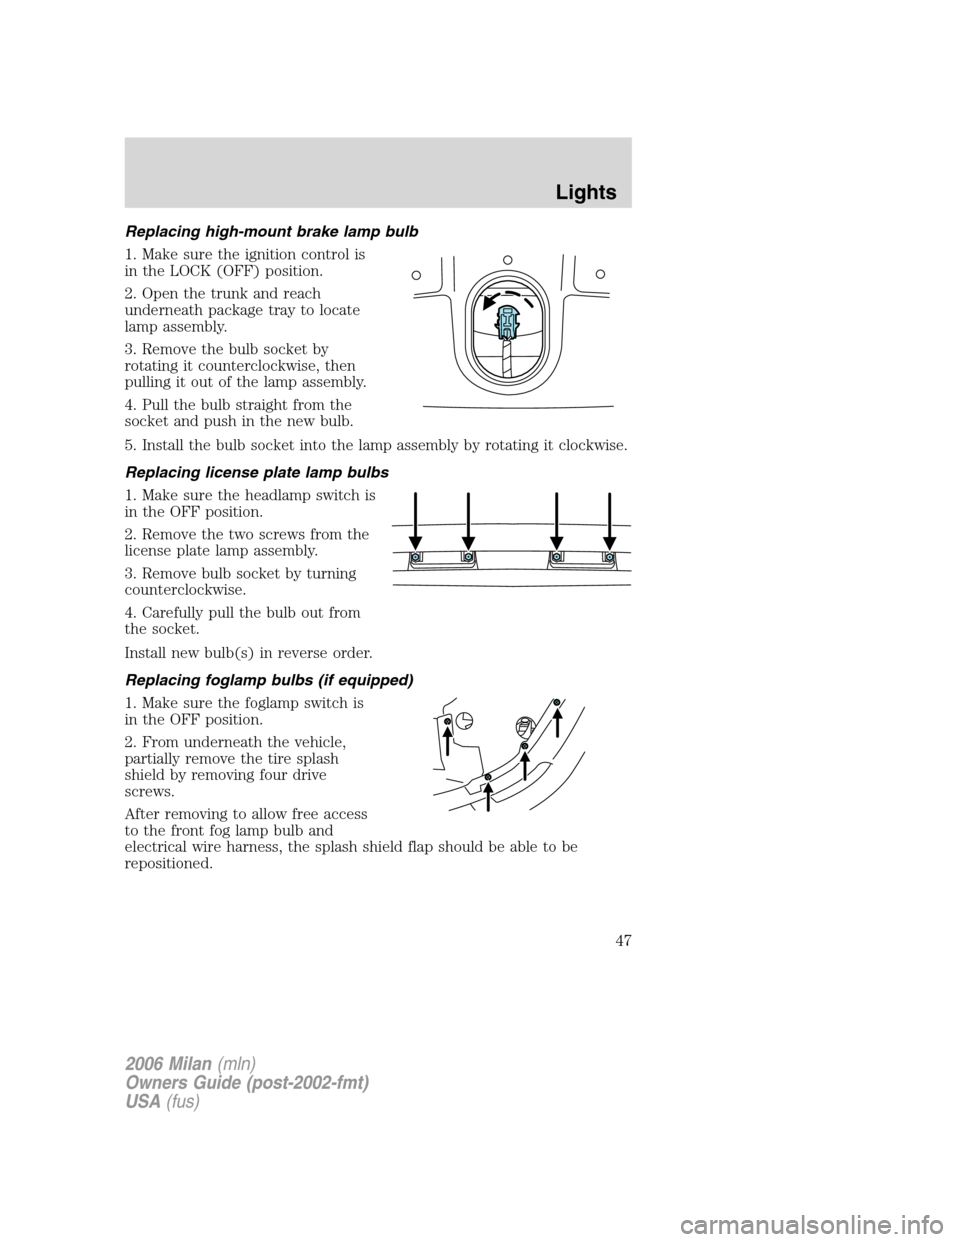 Mercury Milan 2006  s Service Manual Replacing high-mount brake lamp bulb
1. Make sure the ignition control is
in the LOCK (OFF) position.
2. Open the trunk and reach
underneath package tray to locate
lamp assembly.
3. Remove the bulb so